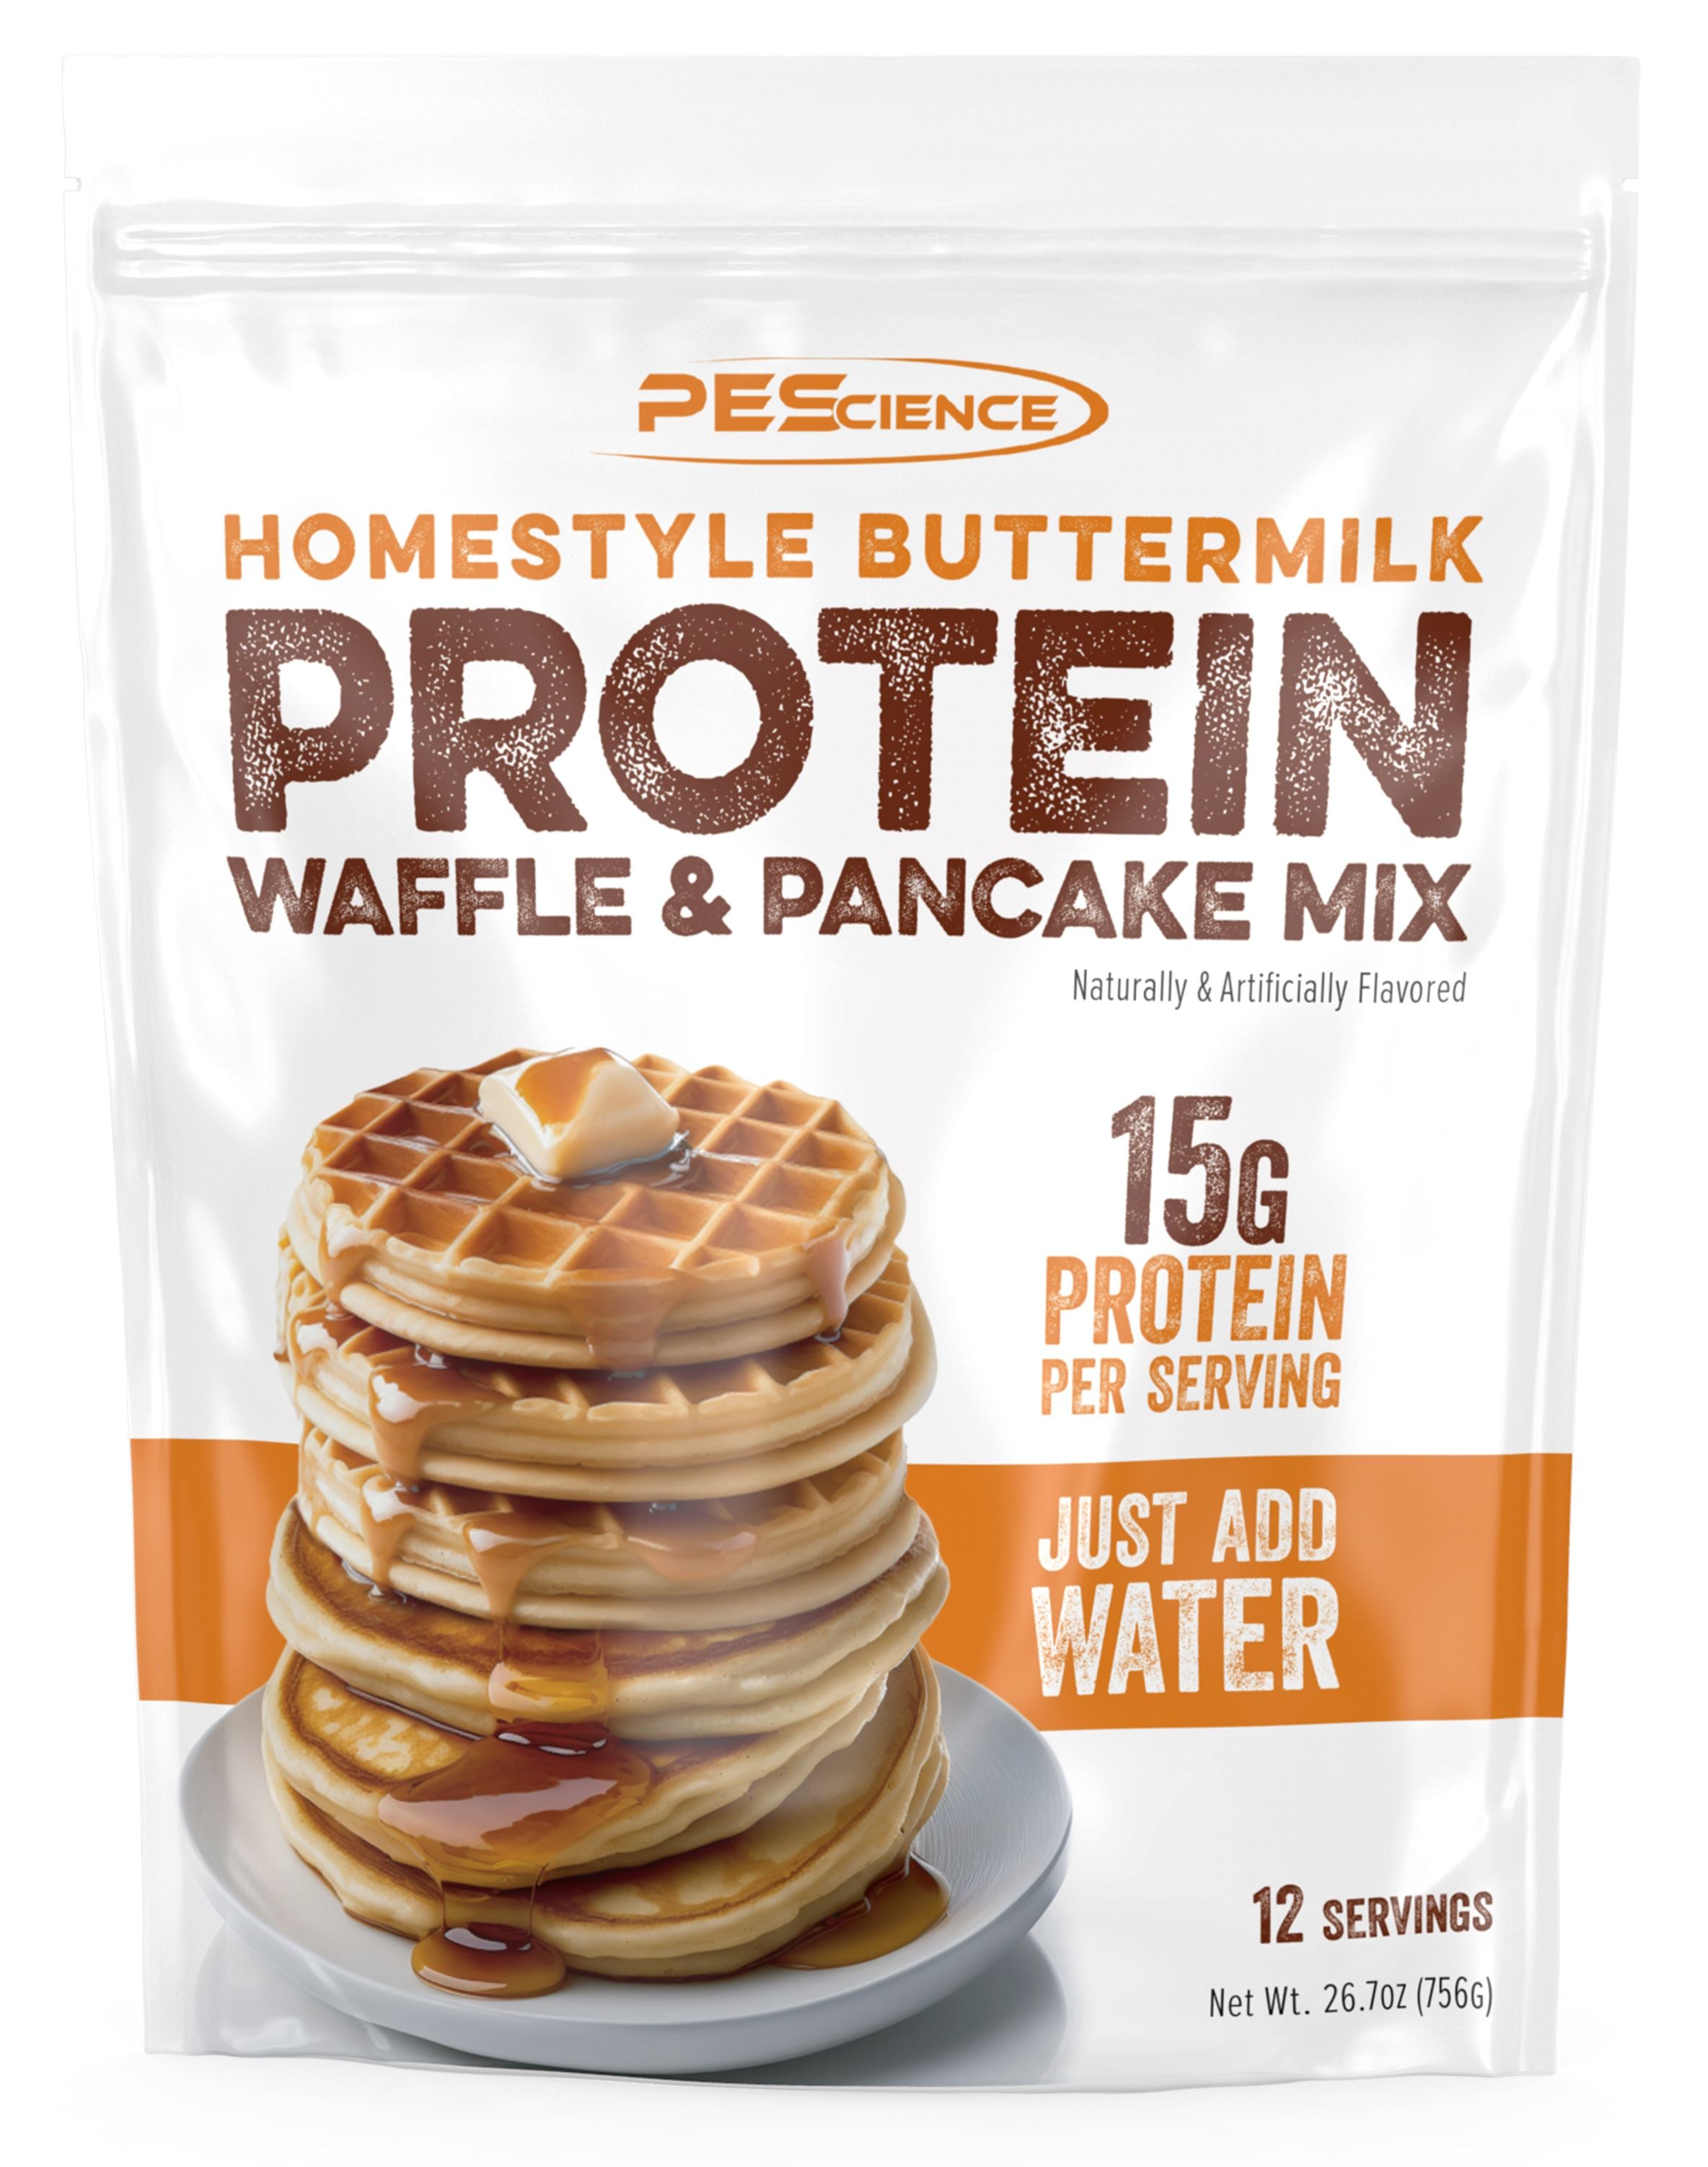 mytologi råd Sky Protein Pancake & Waffle Mix | 15g Protein | Just Add Water – PEScience